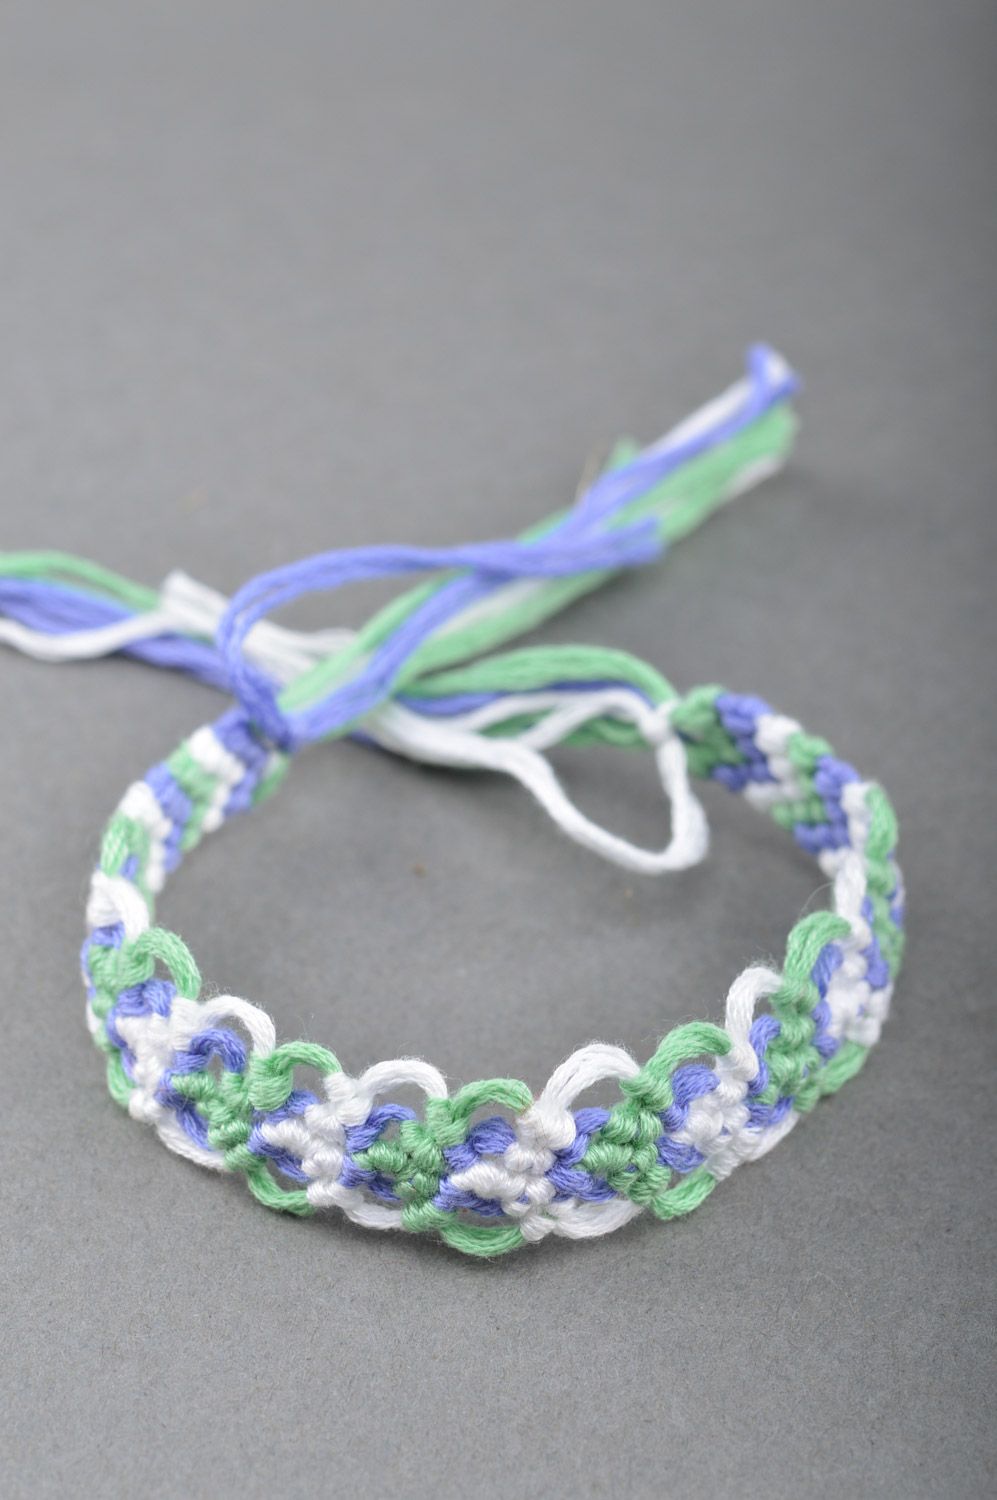 Thin handmade friendship wrist bracelet woven of embroidery floss in tender colors photo 2